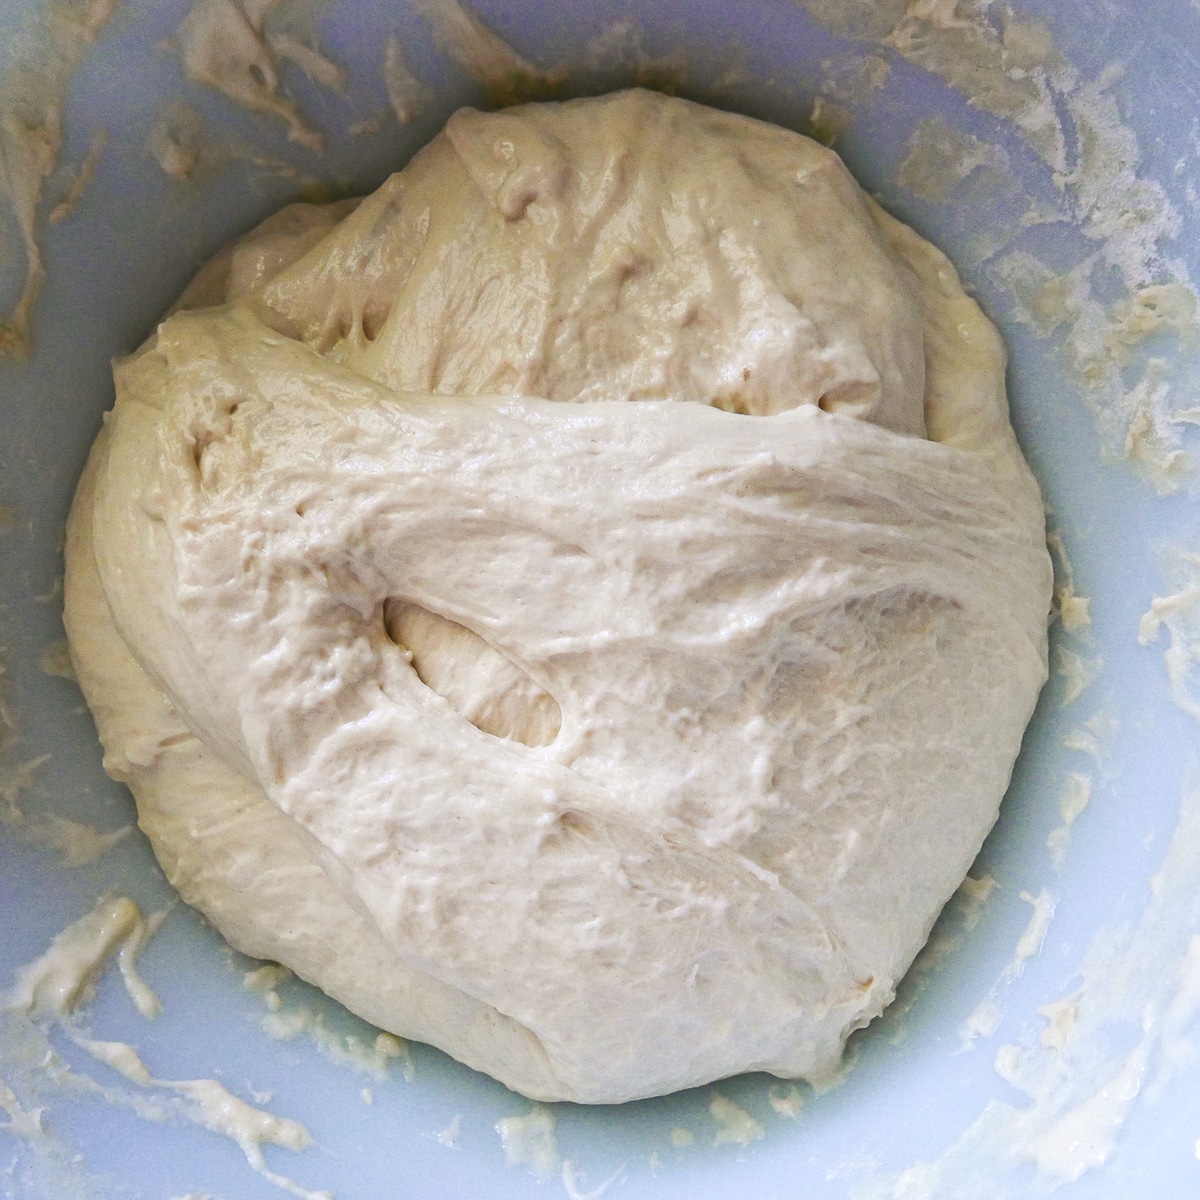 stretched and folded dough doubled in size and resting in a bowl.